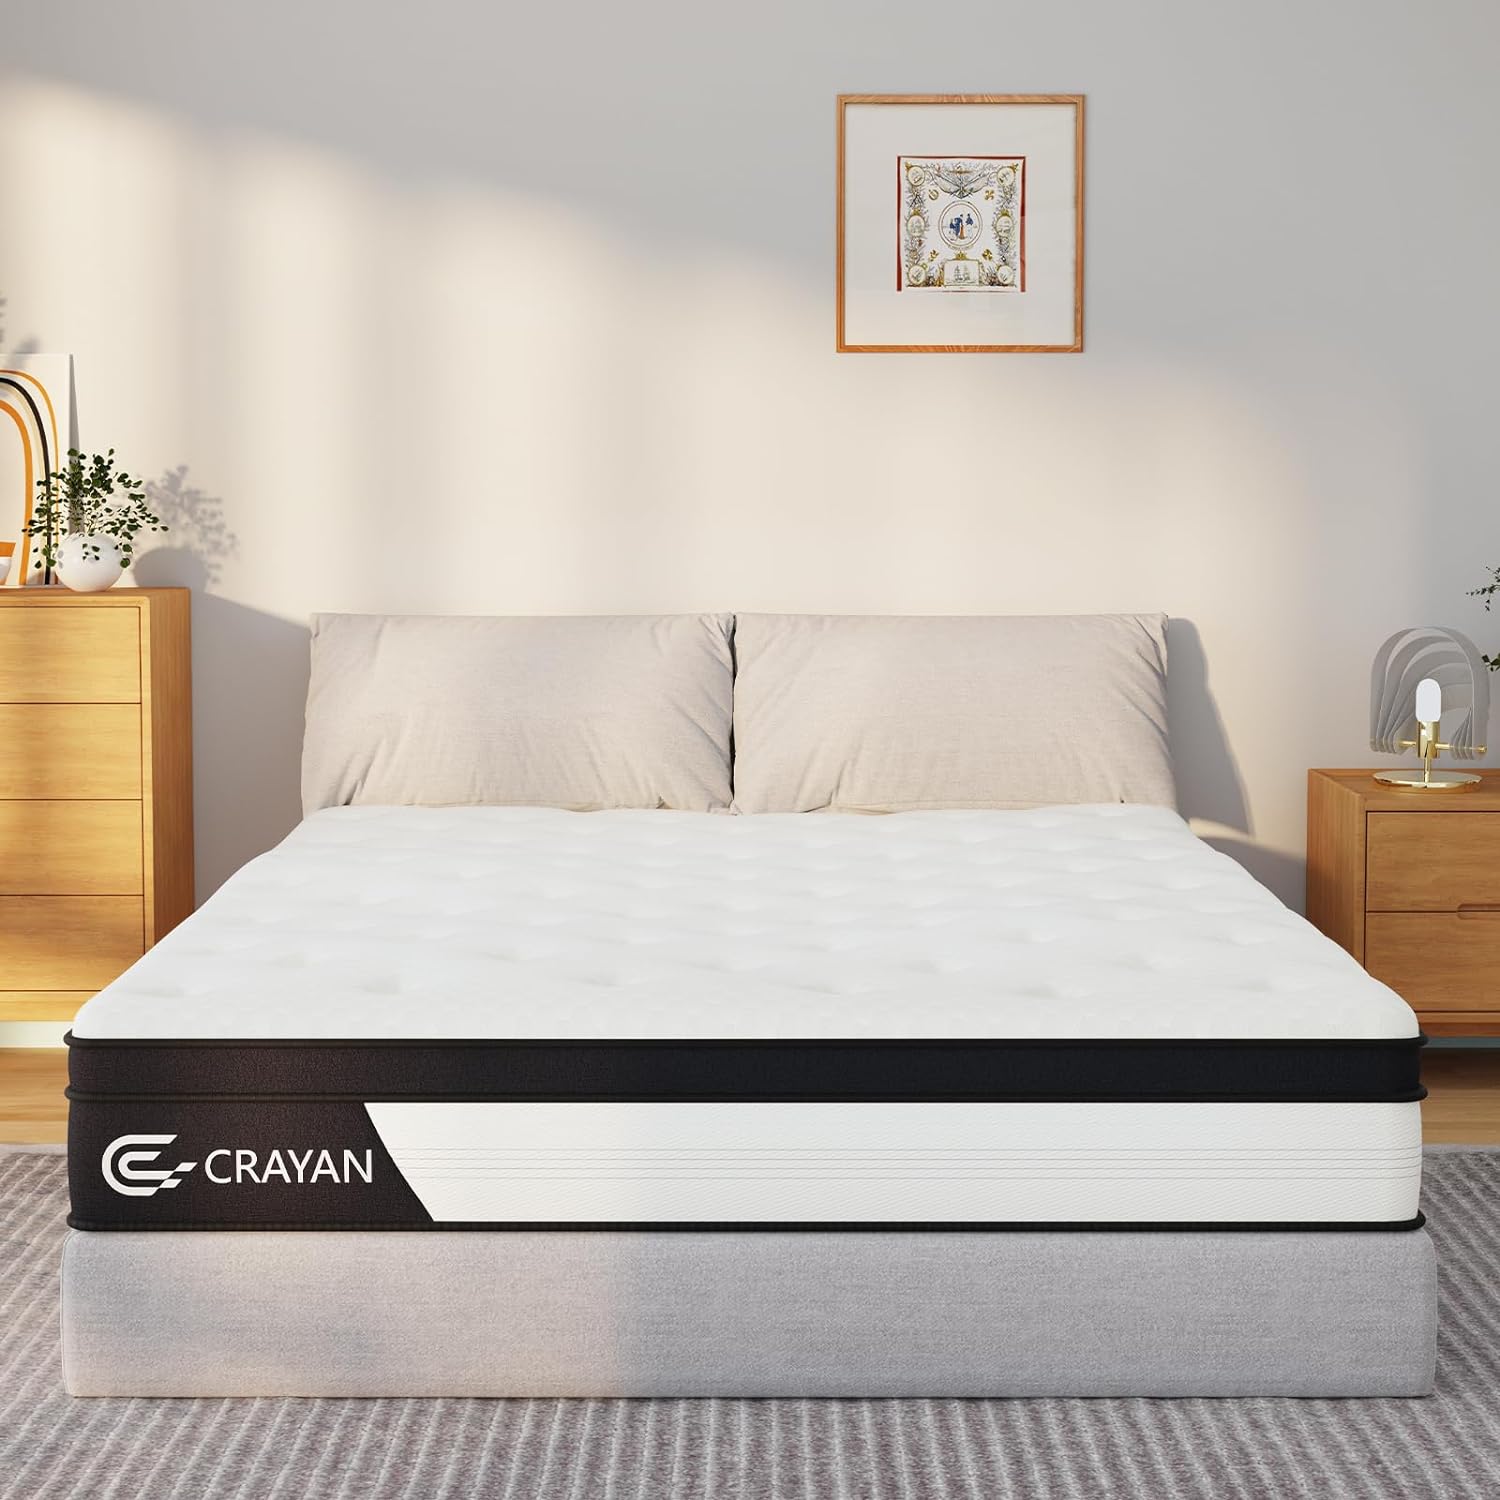 Crayan Full Mattress, 12 Inch Hybrid Mattress in a Box, Memory Foam Pocket Springs Mattress with Motion Isolation and Pressure Relieving, Edge Support, CertiPUR-US